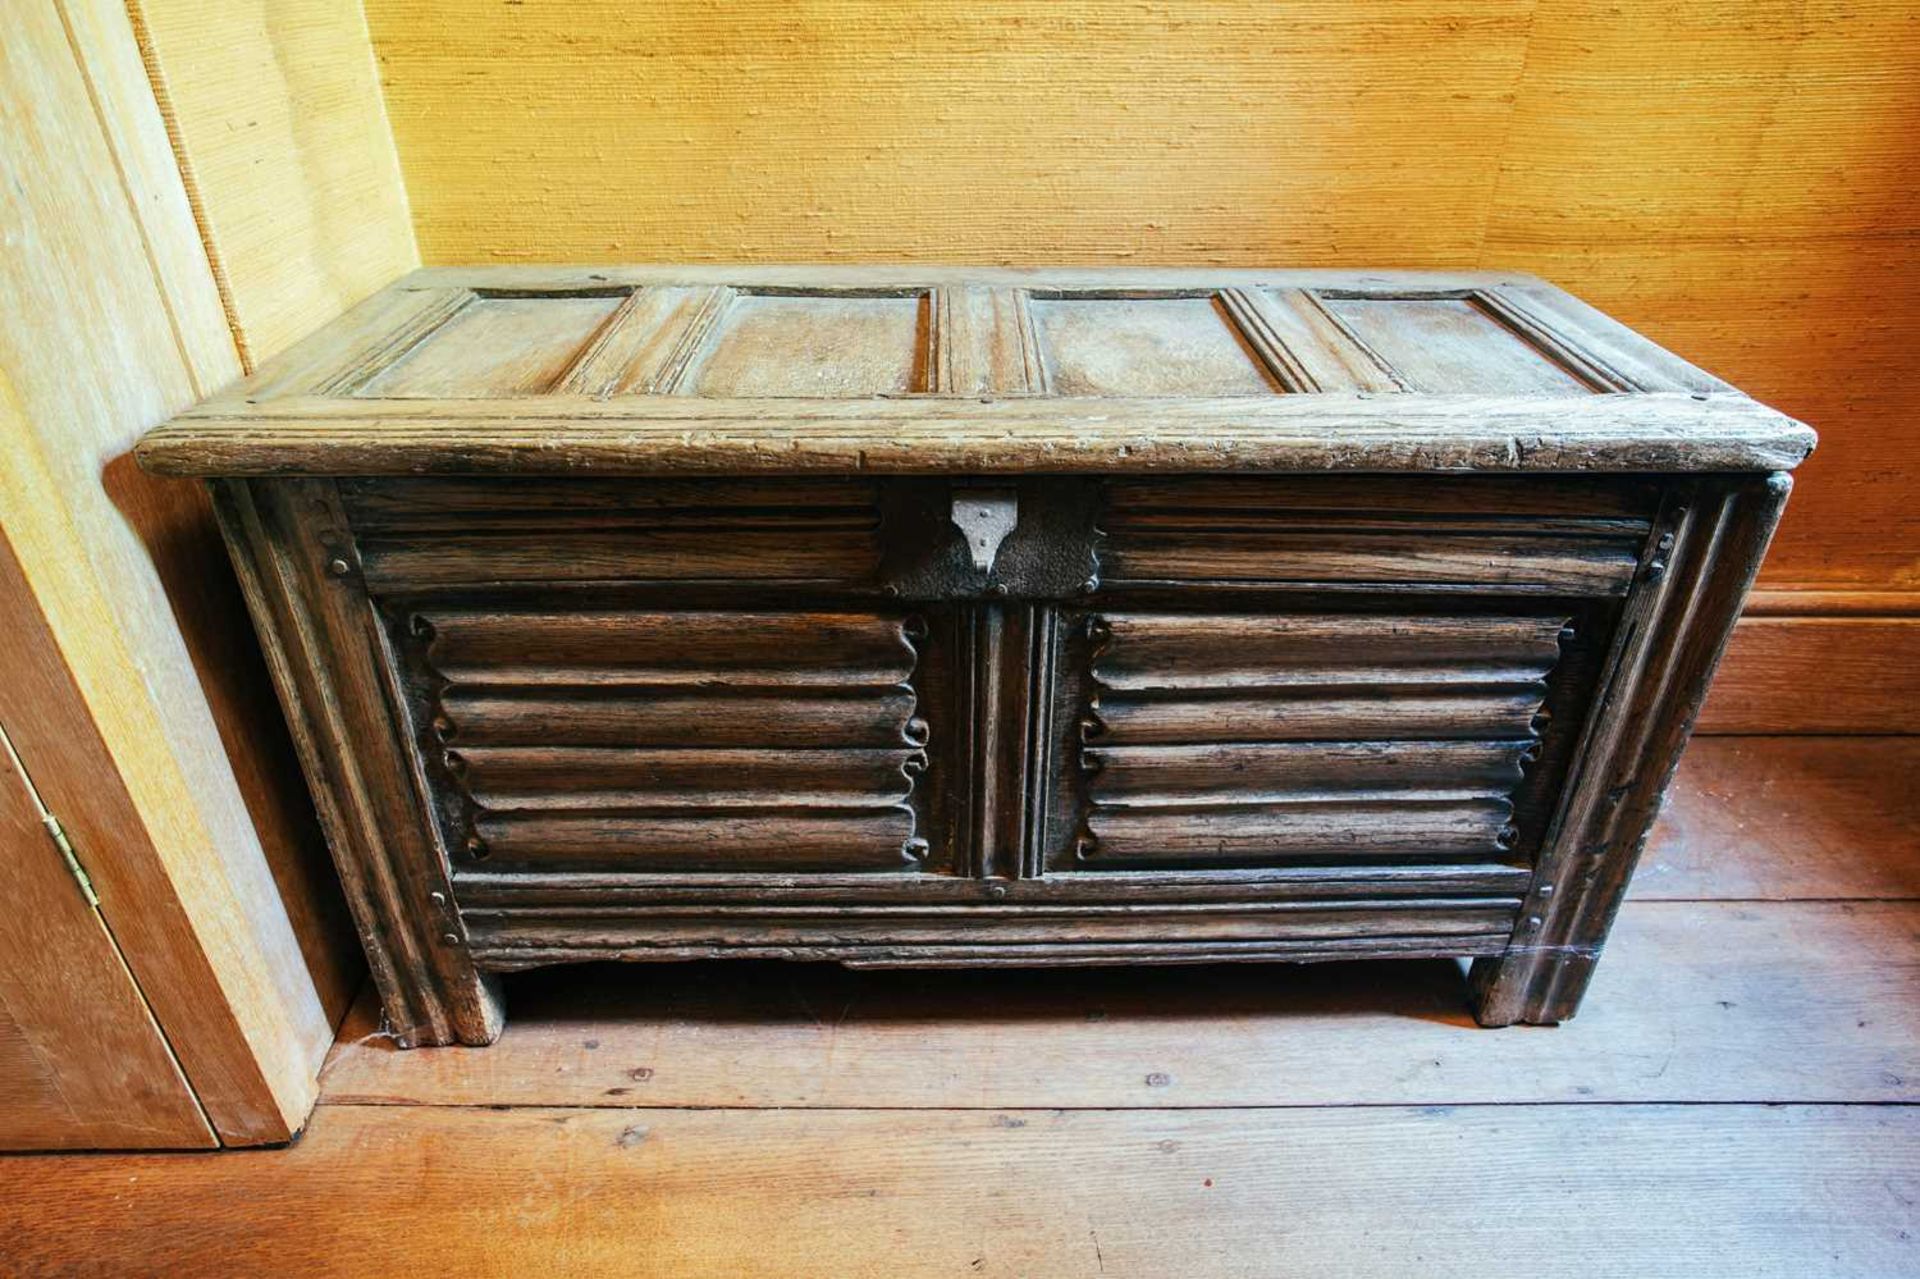 A 16th-century oak coffer, of small proportions, with linenfold facade, 49 cm high x 90 cm wide x 38